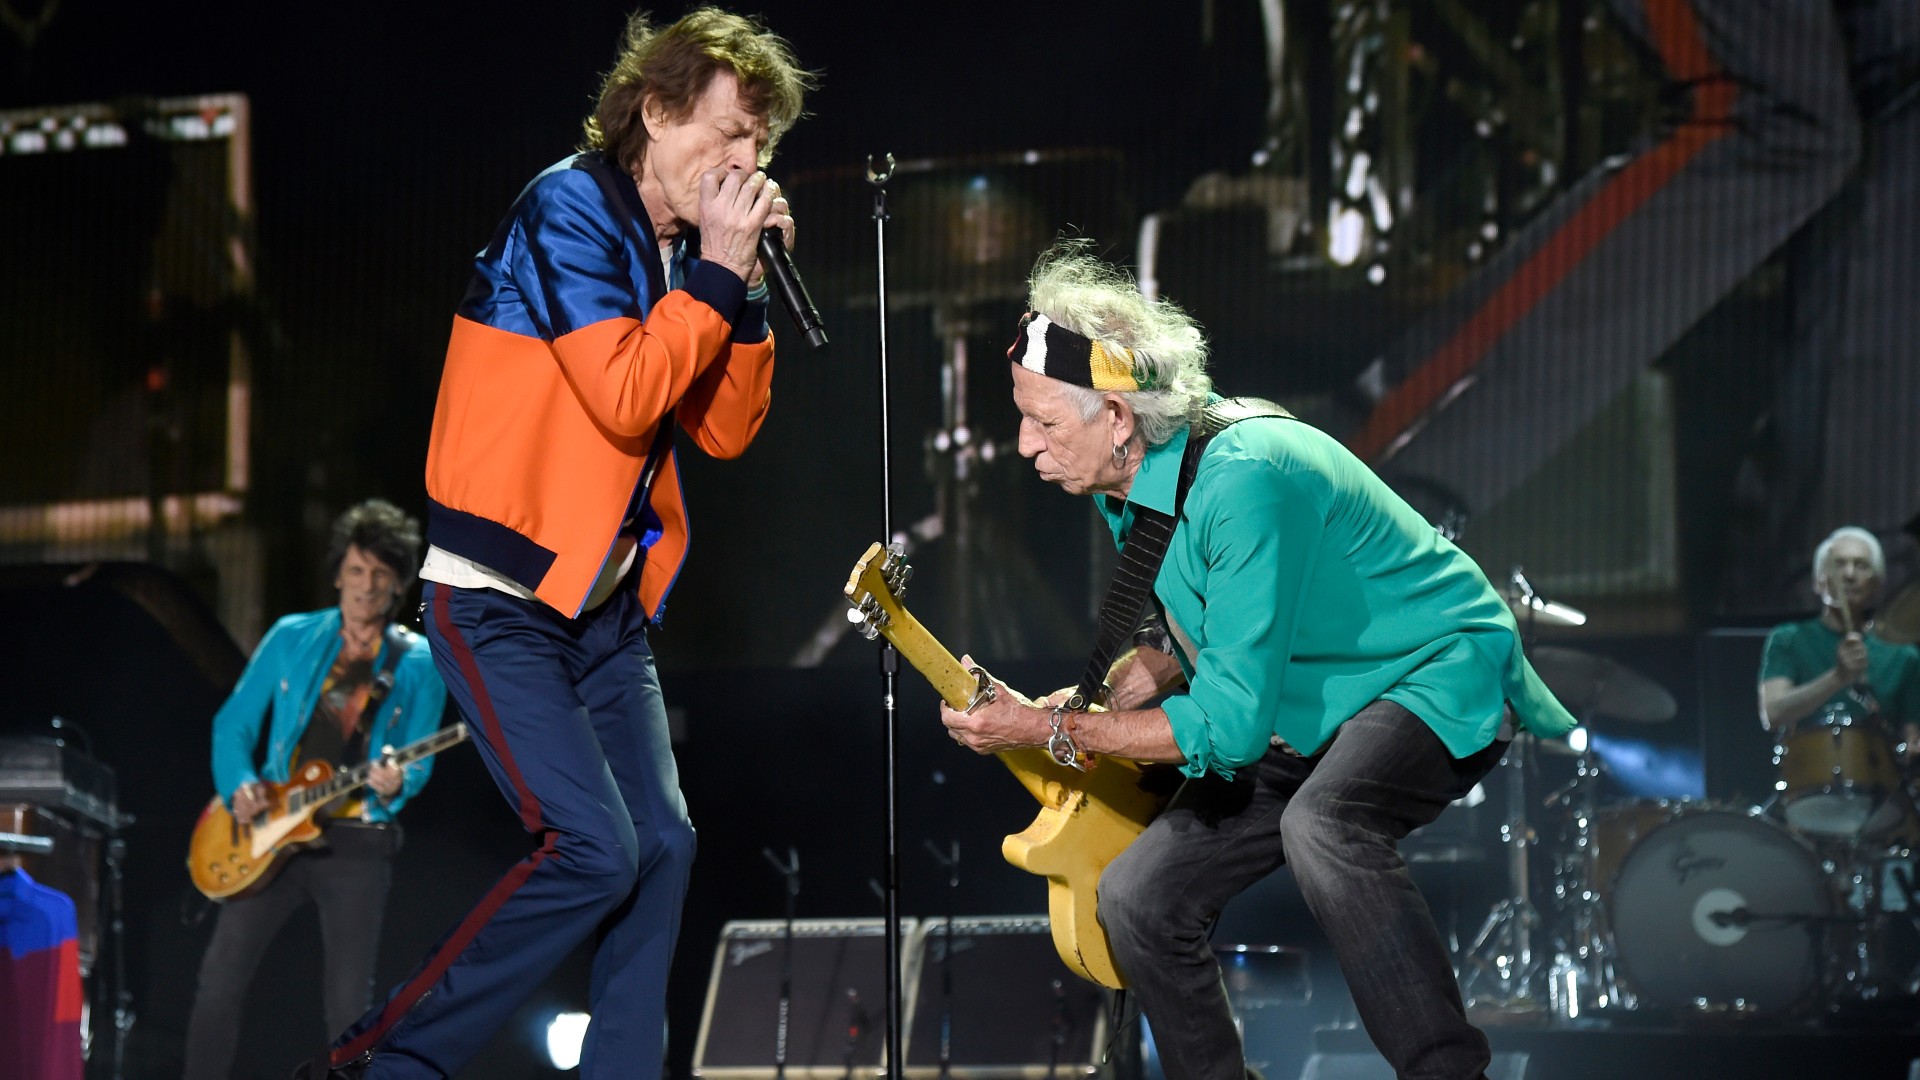 Documentary About New Rolling Stones Album Readied as TV Special